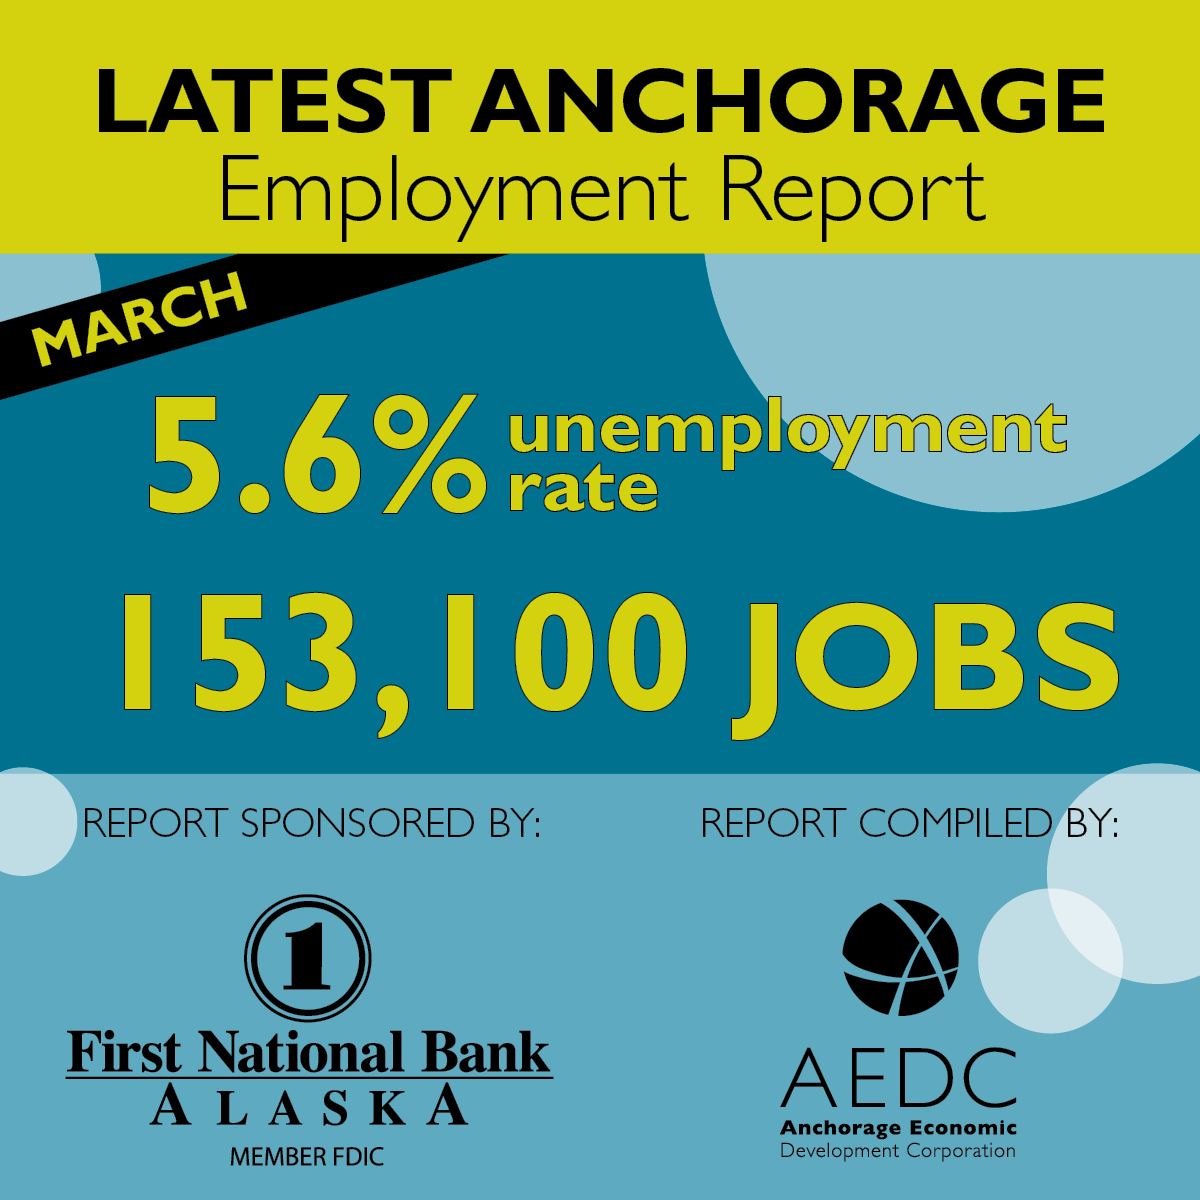 Anchorage Employment Report: Second Edition 2015